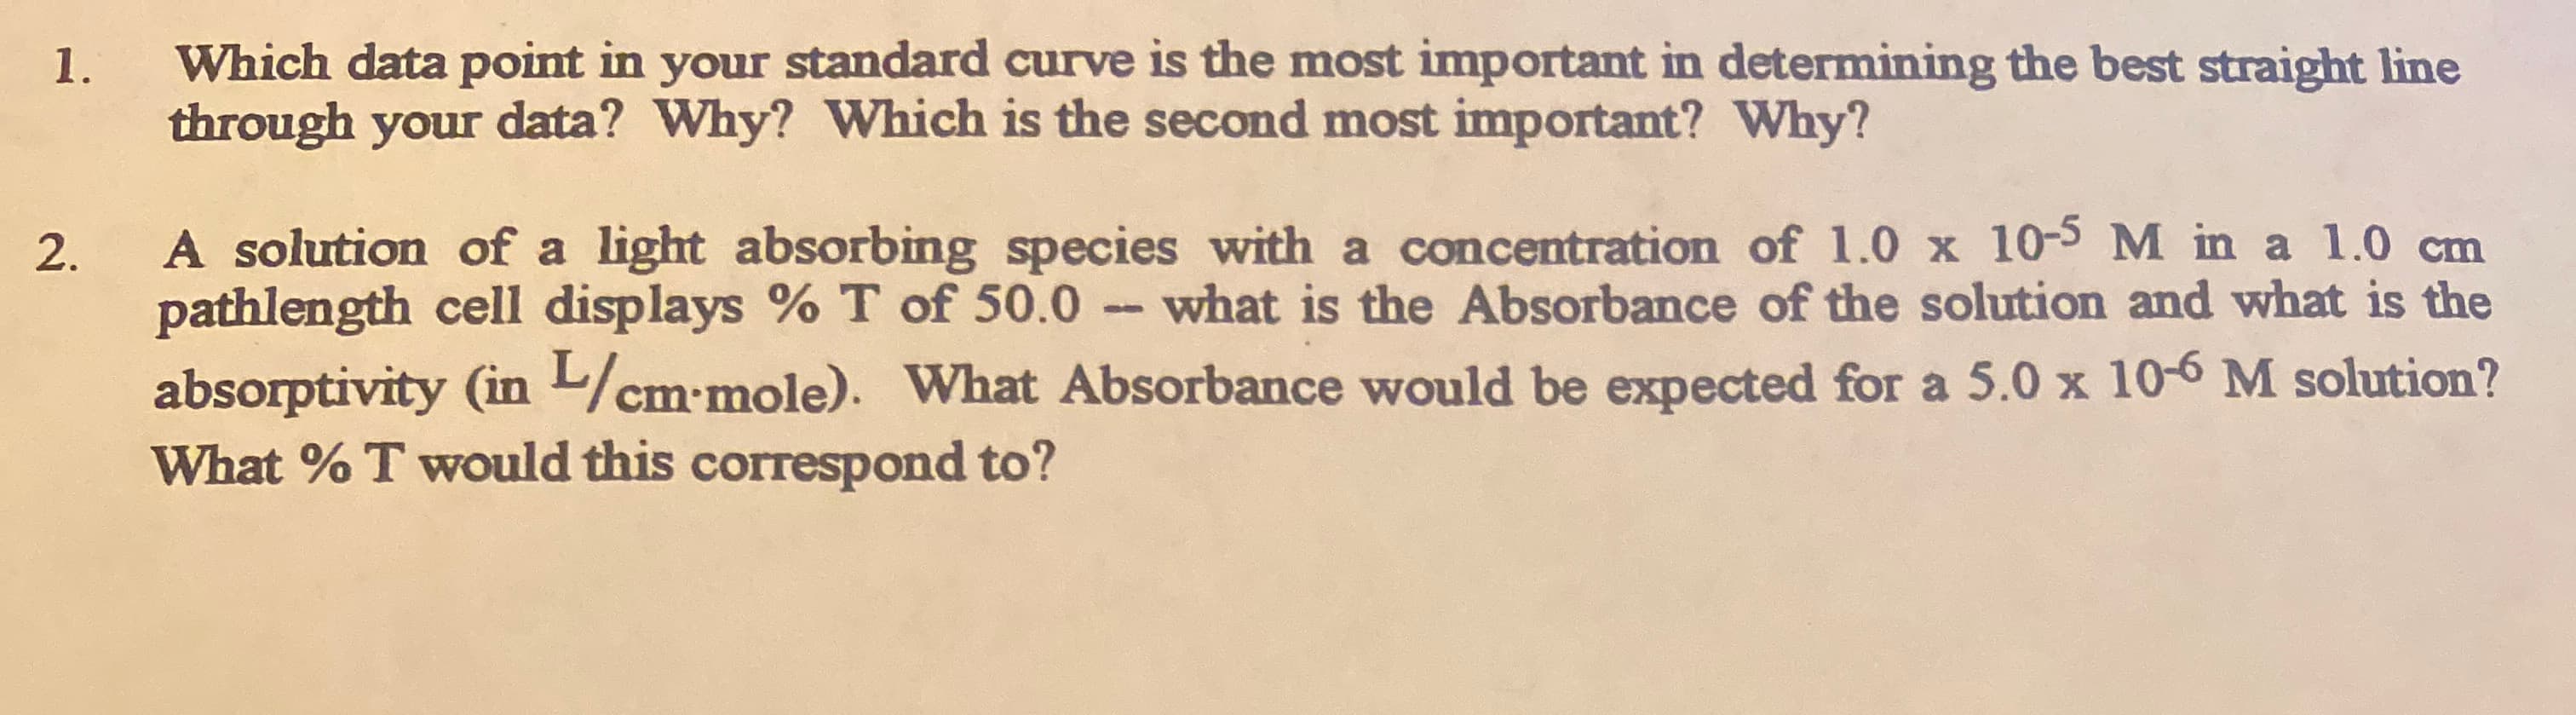 Which data point in your standard curve is the most important in determining the best straight line
1.
through your data? Why? Which is the second most important? Why?
pathlength cell displays % T of 50.0 what is the Absorbance of the solution and what is the
absorptivity (in /cm-mole). What Absorbance would be expected for a 5.0 x 10-6 M solution?
What % T would this correspond to?
2.
A solution of a light absorbing species with a concentration of 1.0 x 10-5M in a 1.0 cm
